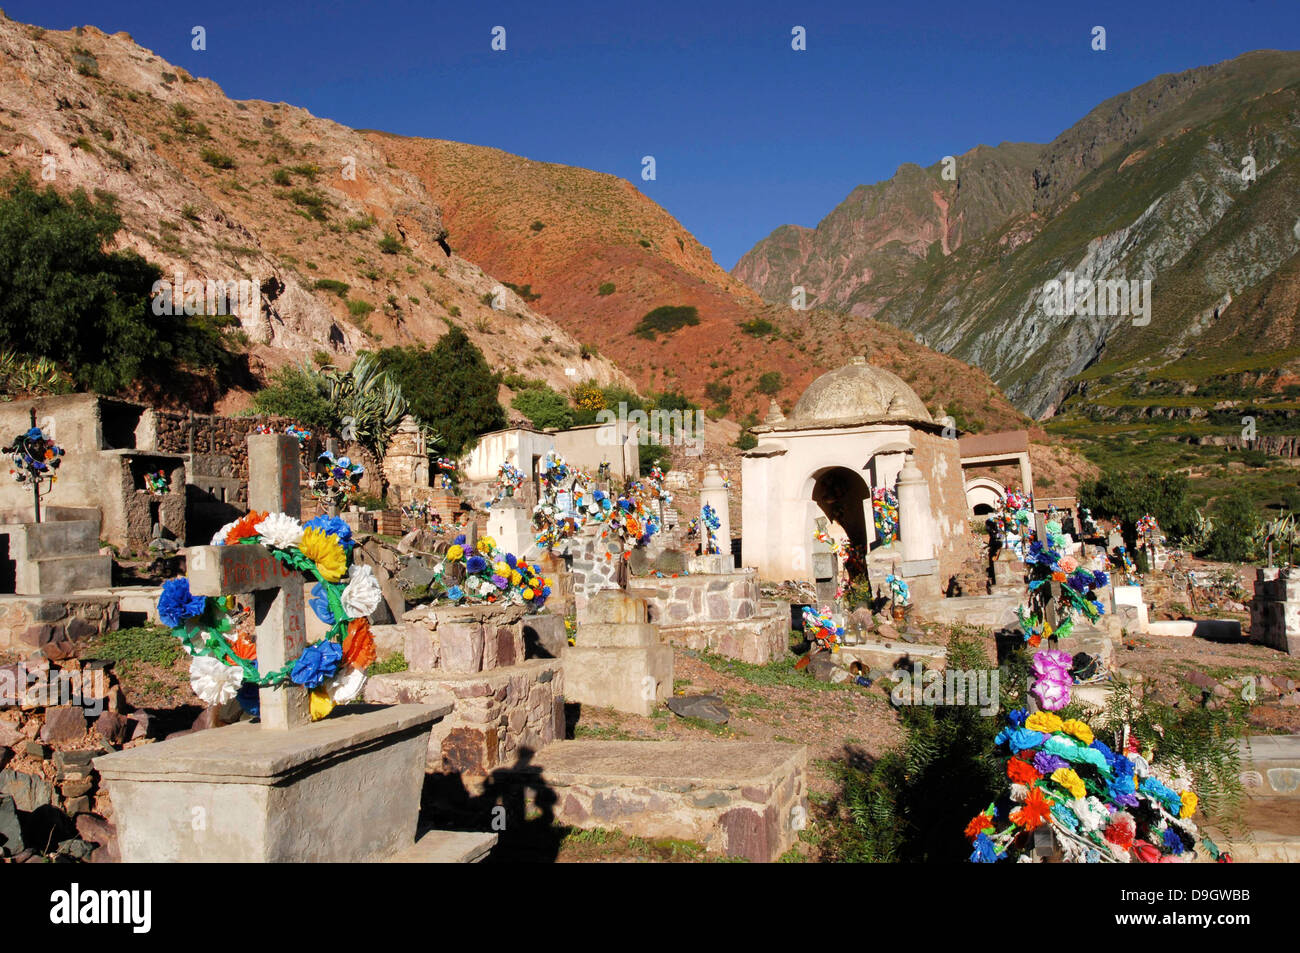 Iruya. In many villages of Andean culture, it is traditional that the cemetery occupies the highest part of the village. Stock Photo